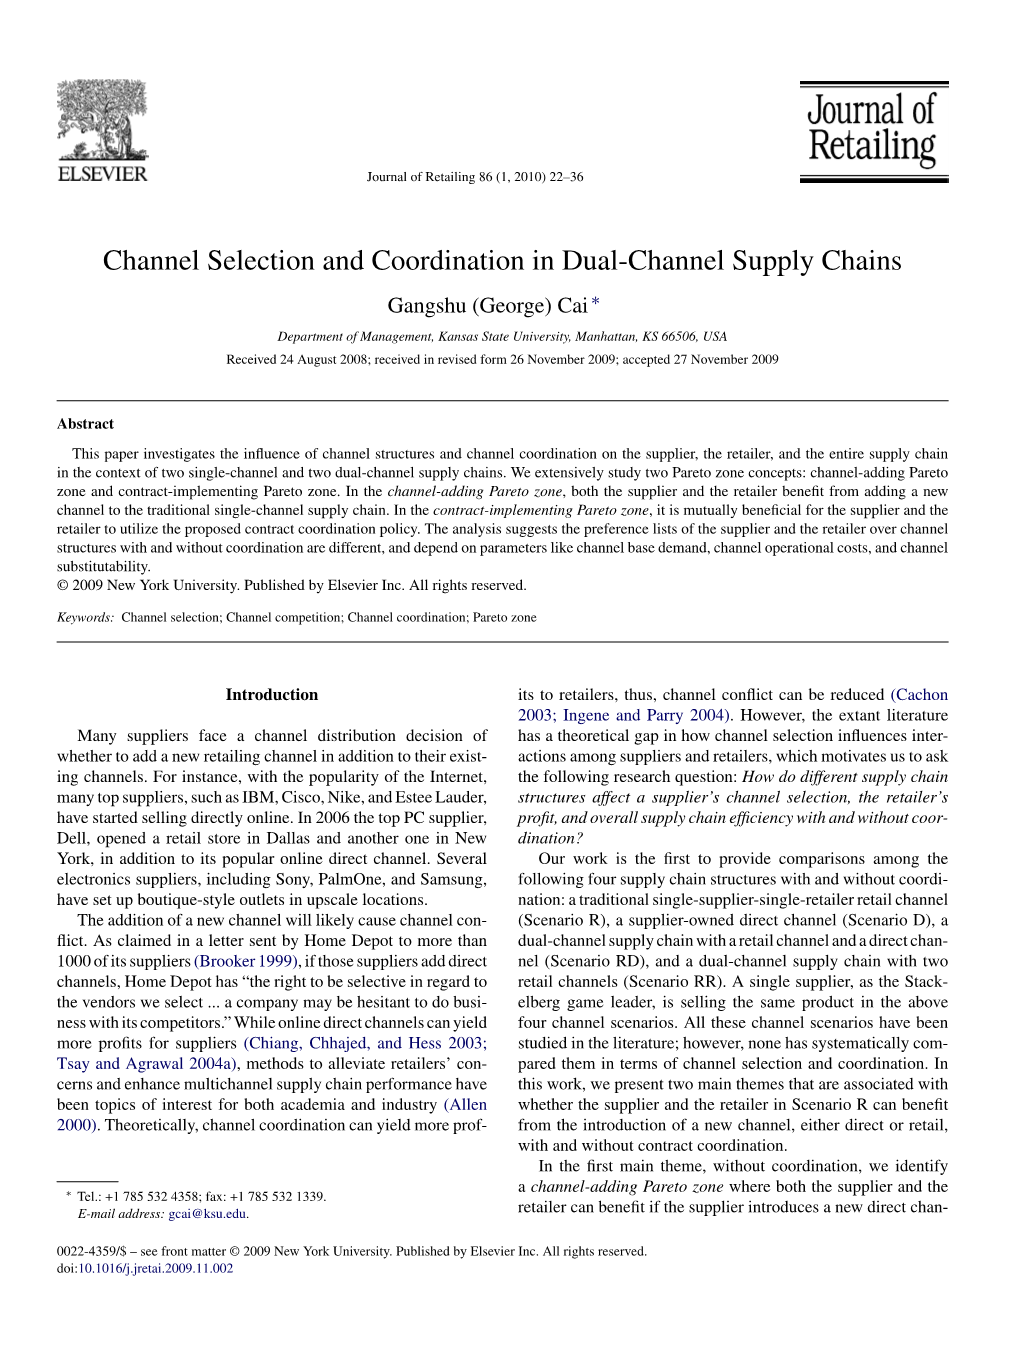 Channel Selection and Coordination in Dual-Channel Supply Chains